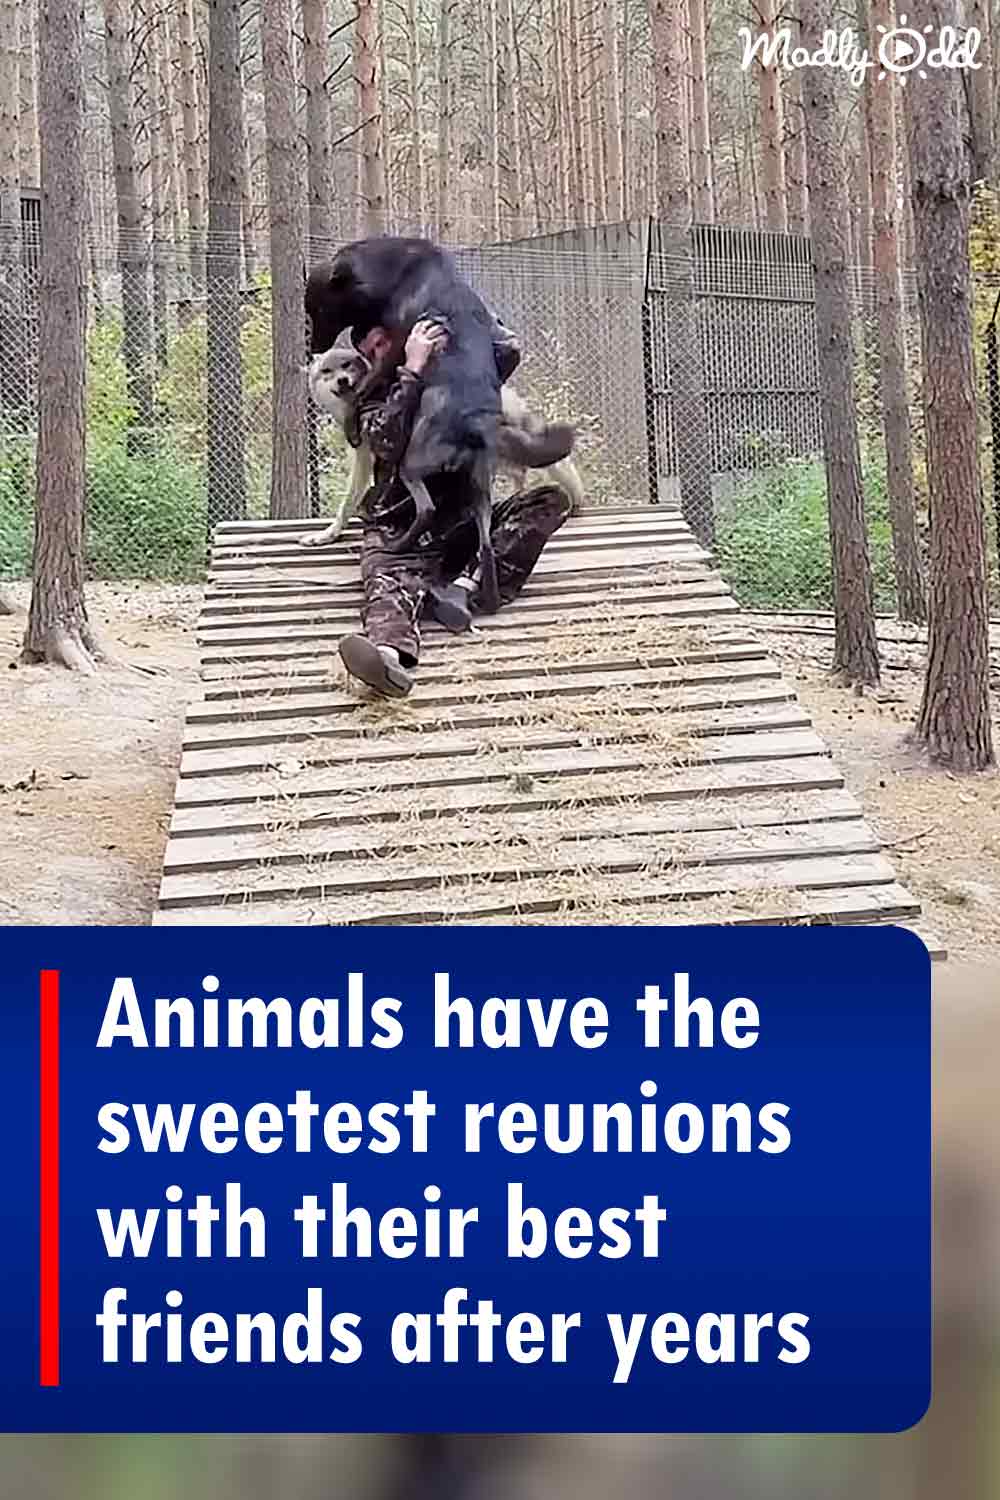 Animals have the sweetest reunions with their best friends after years